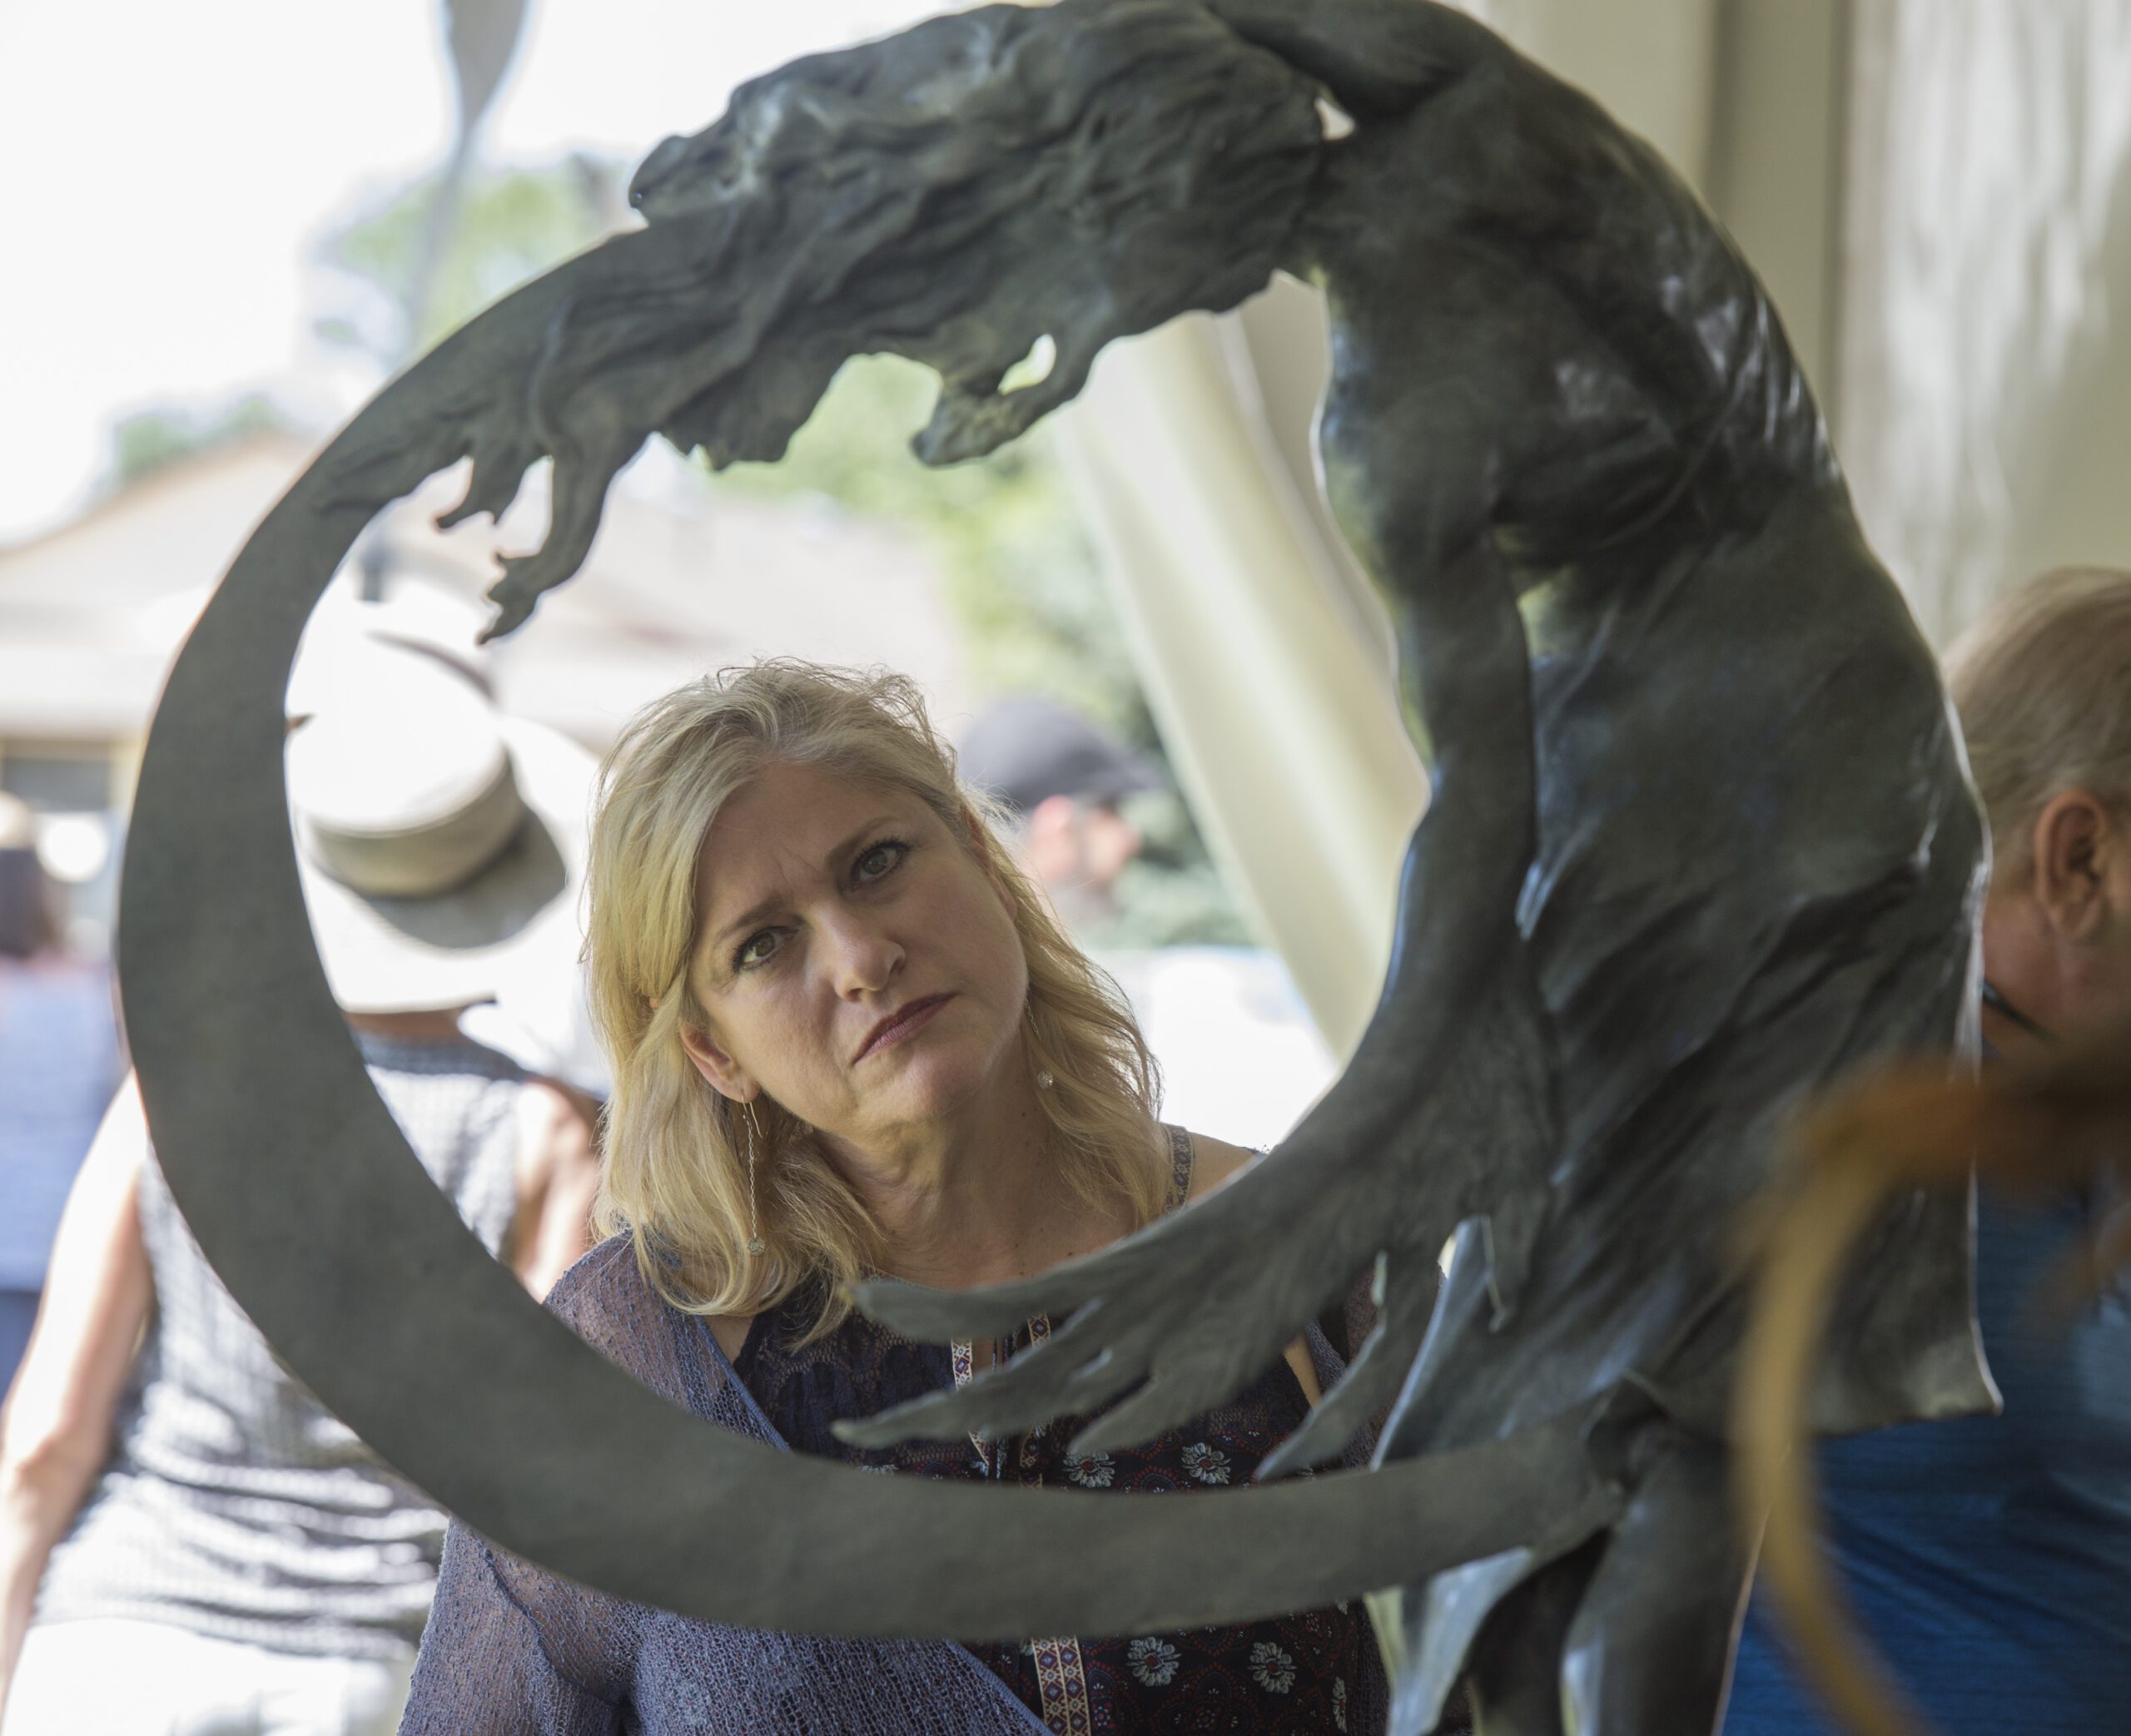 A woman examines a sculpture at Loveland, Colorado's Sculpture in the Park event.